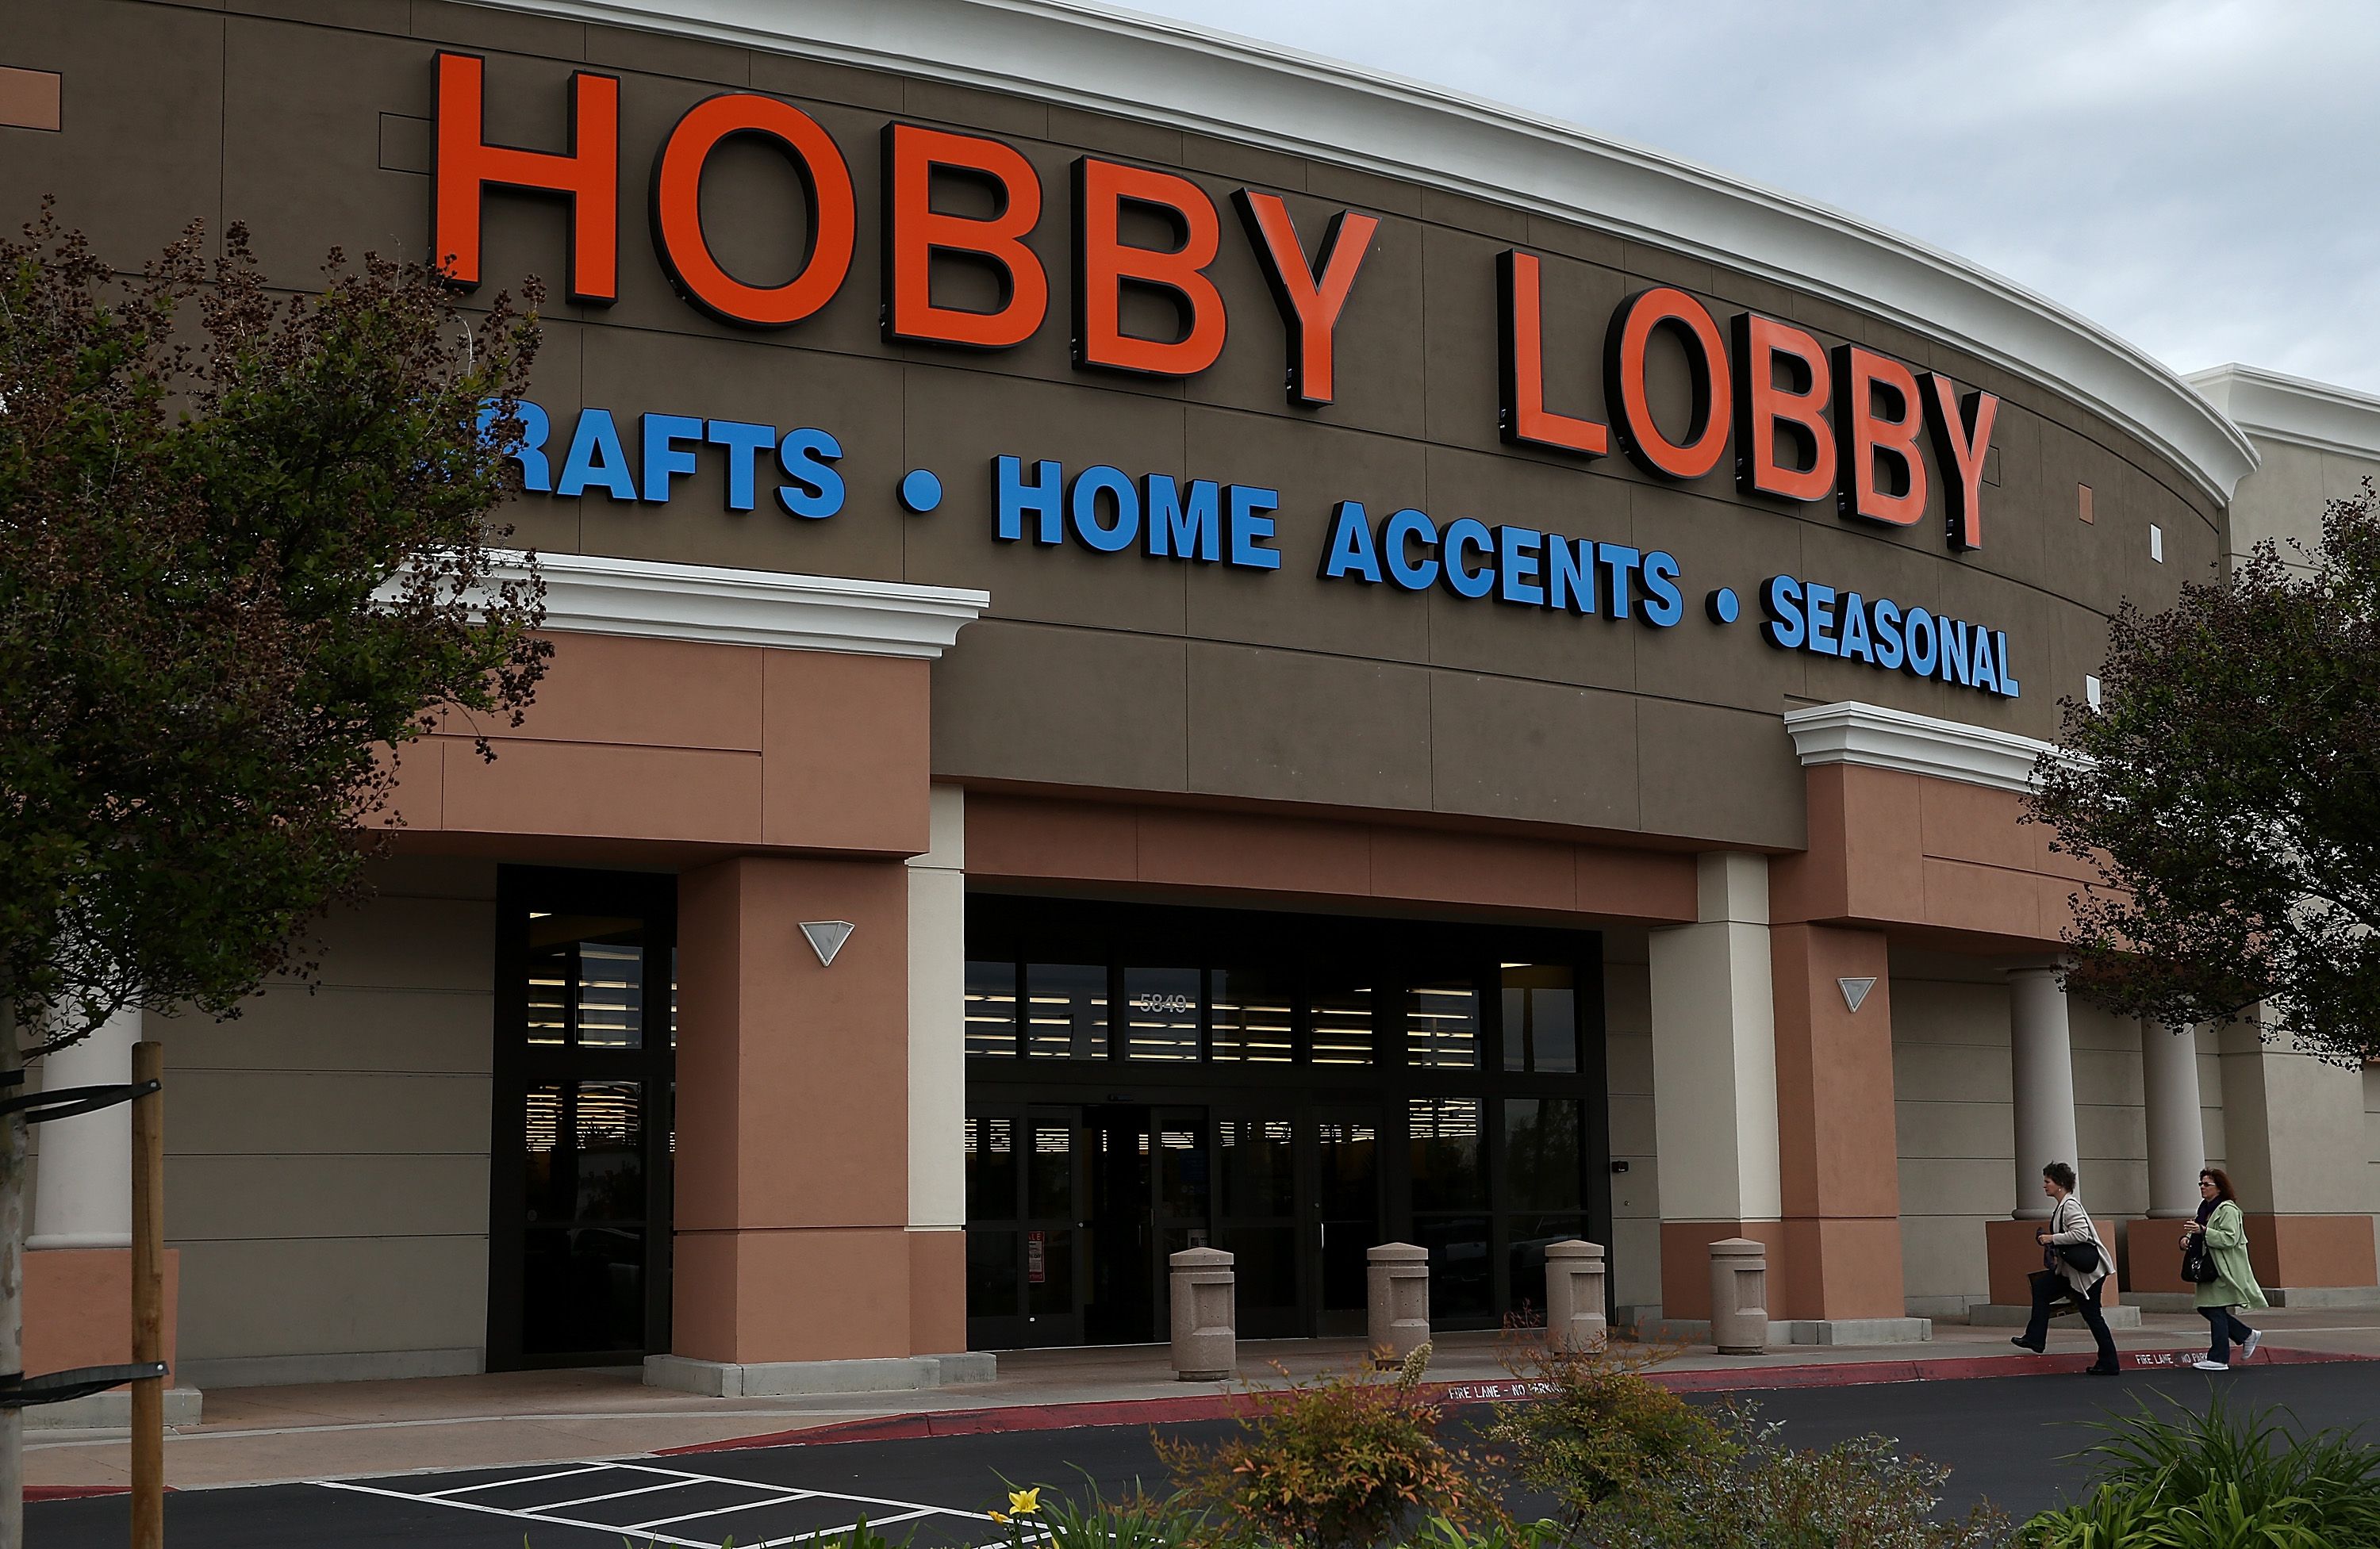 hobby-lobby-sued-over-promotional-price-practices-wtsp